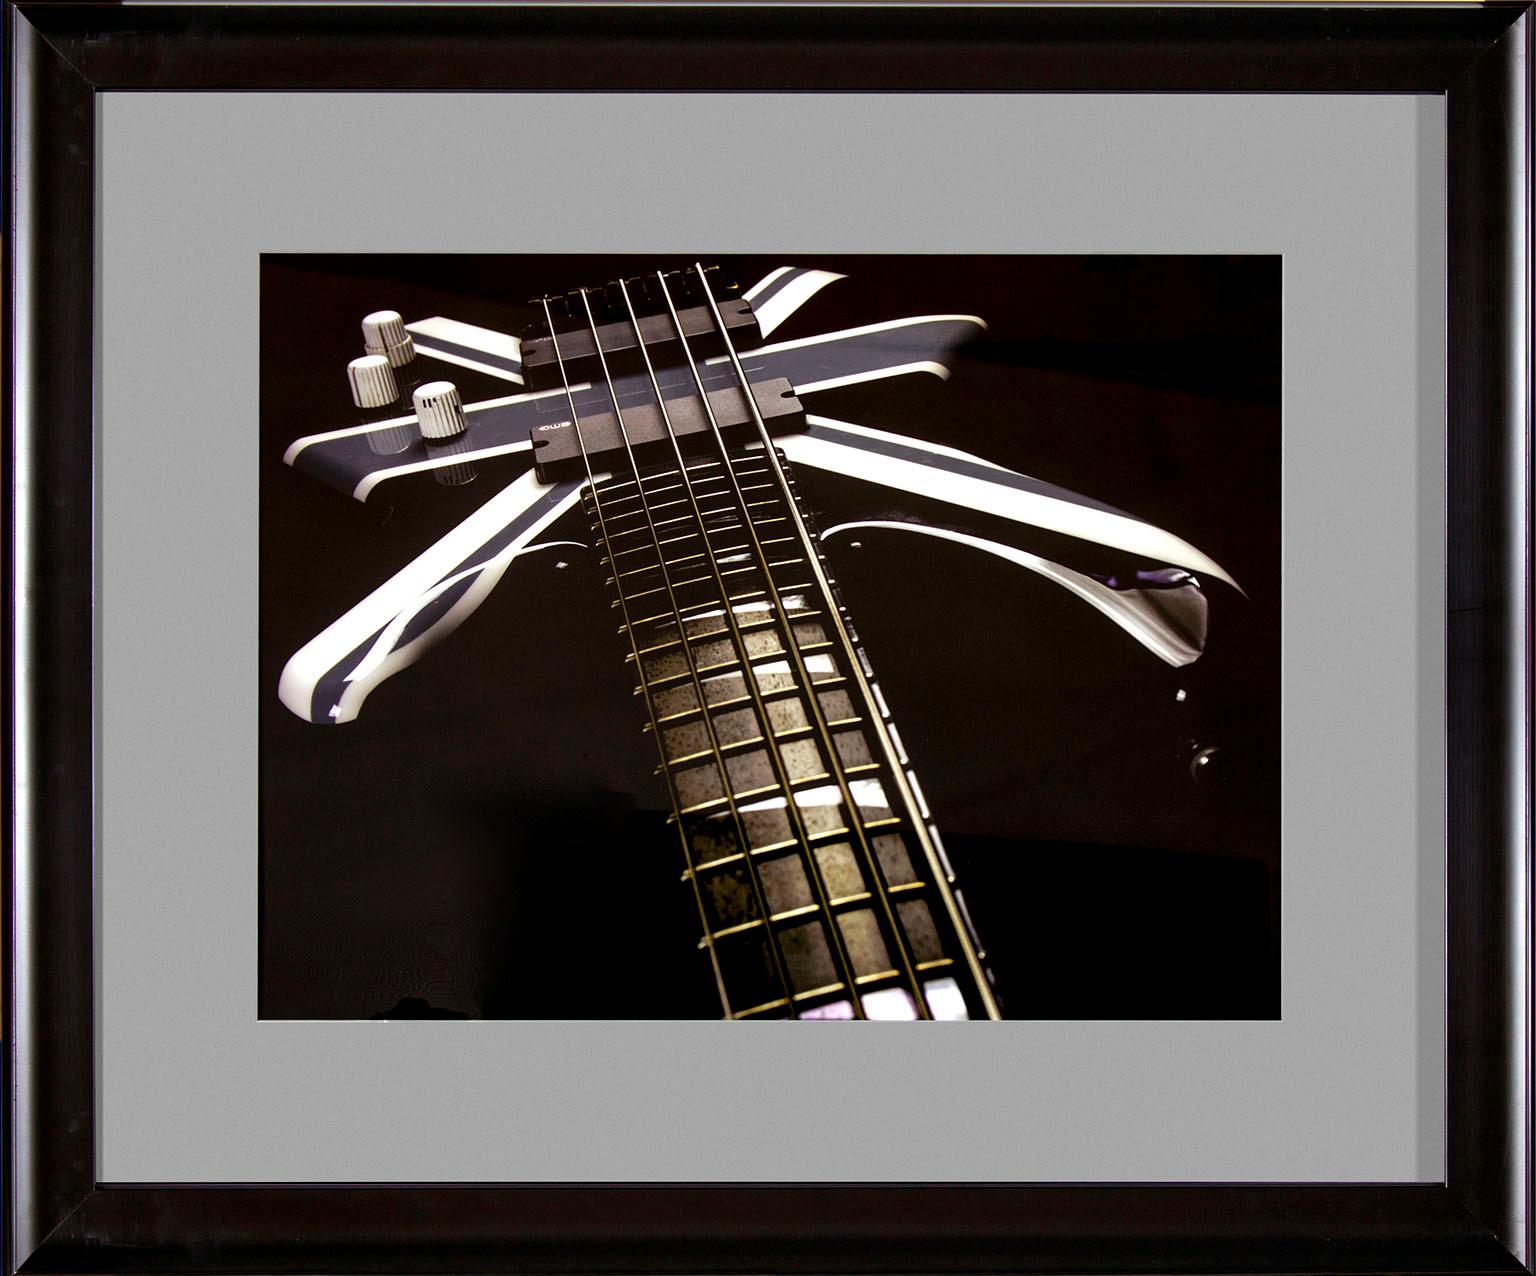 Original photo of a Rick Savage Def Leppard guitar taken by Lisa S. Johnson for her book, "108 Rock Star Guitars." This framed photo was displayed in one of the guest rooms of the original Hard Rock Hotel and Casino in Las Vegas, Nevada, and comes